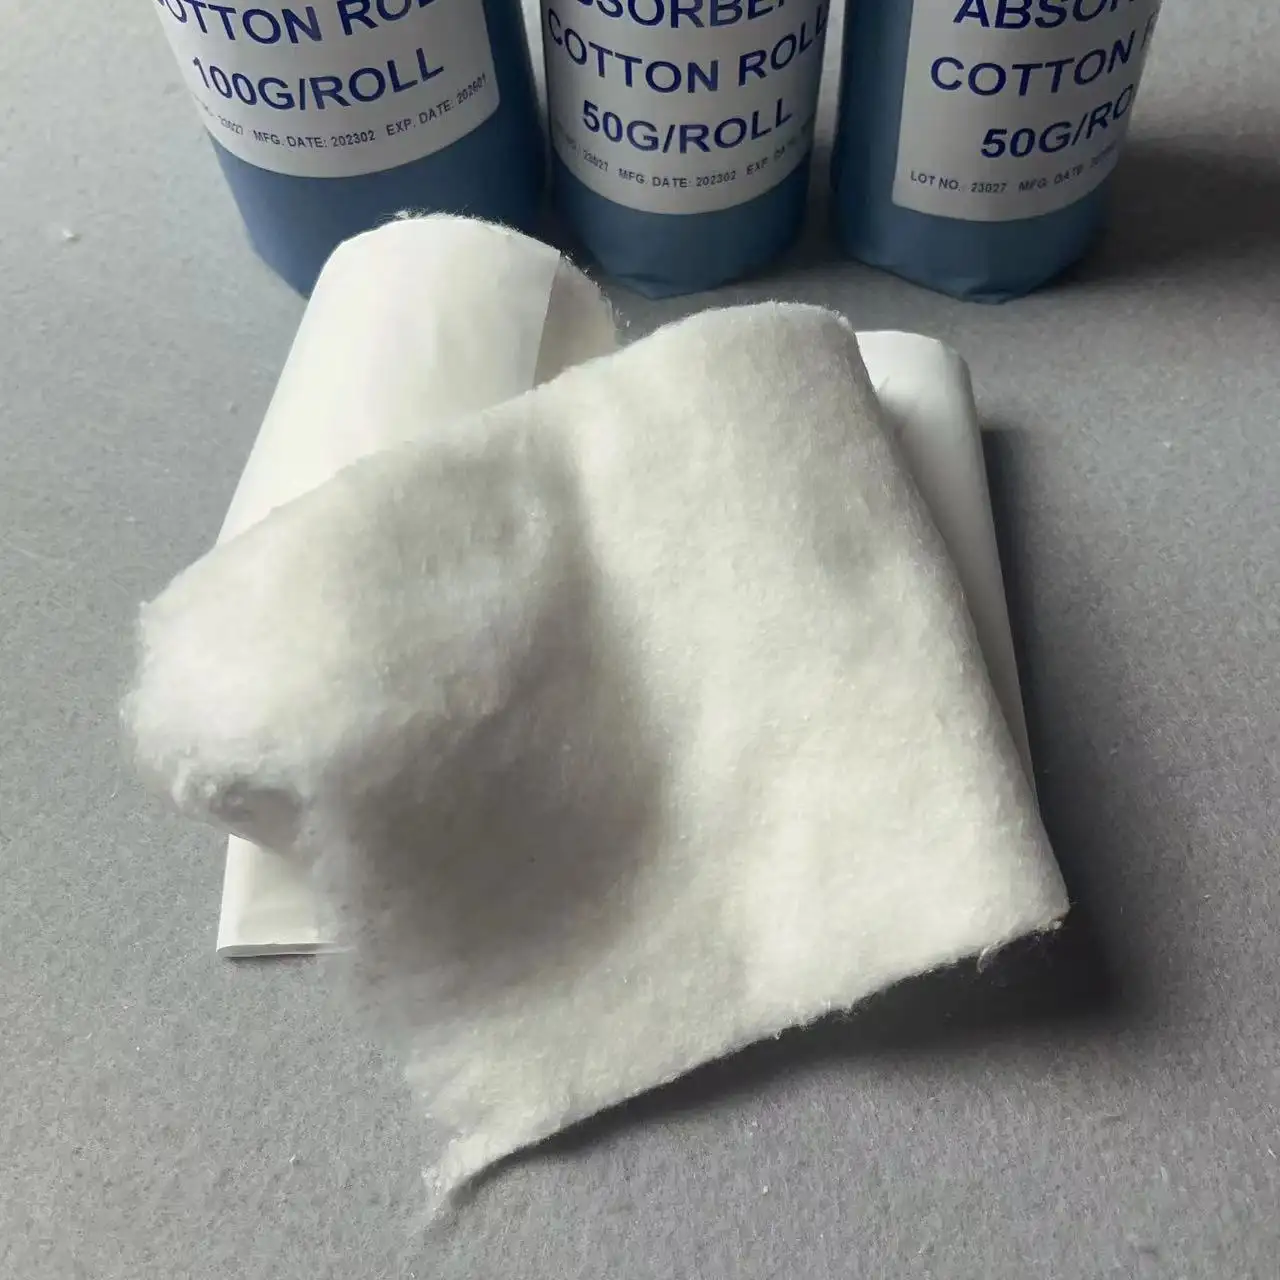 100% Pure Cotton Rolls 500g/roll High Quality Absorbent Cotton Roll